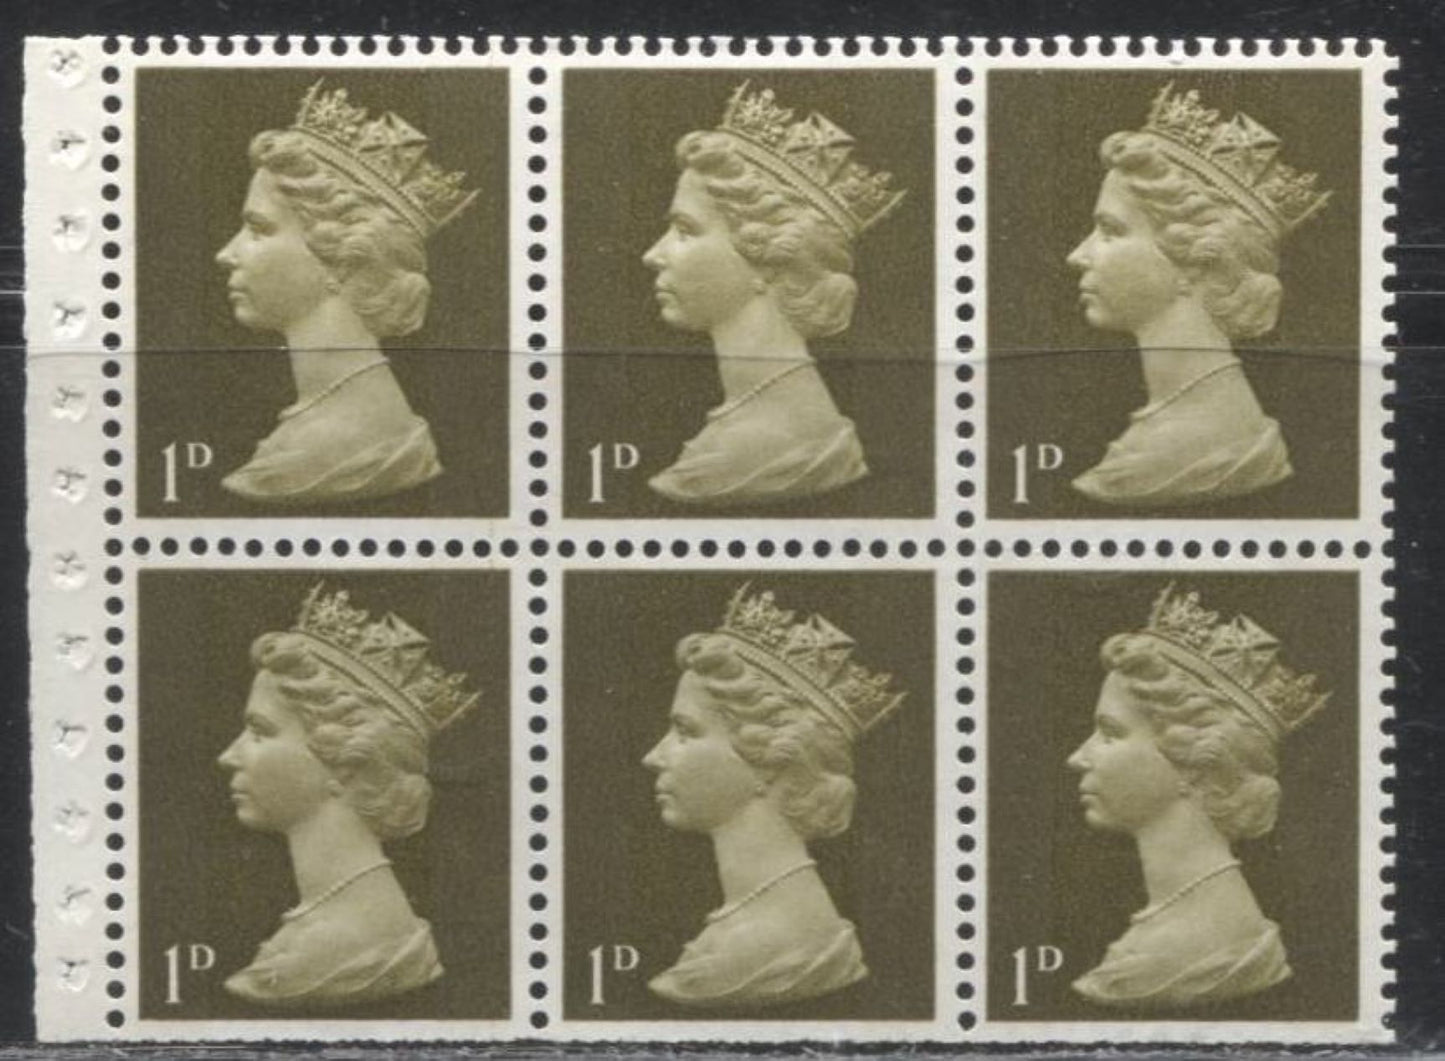 Great Britain SG#LP56 4/6d- Black on Grey Blue 1967-1971 Pre-Decimal Machin Heads Issue, March 1970, Various Fluorescence Levels For Interleaving Pages (Combination B), Low Fluorescent "Victory" Cover on the Front and Medium Fluorescent Back Cover